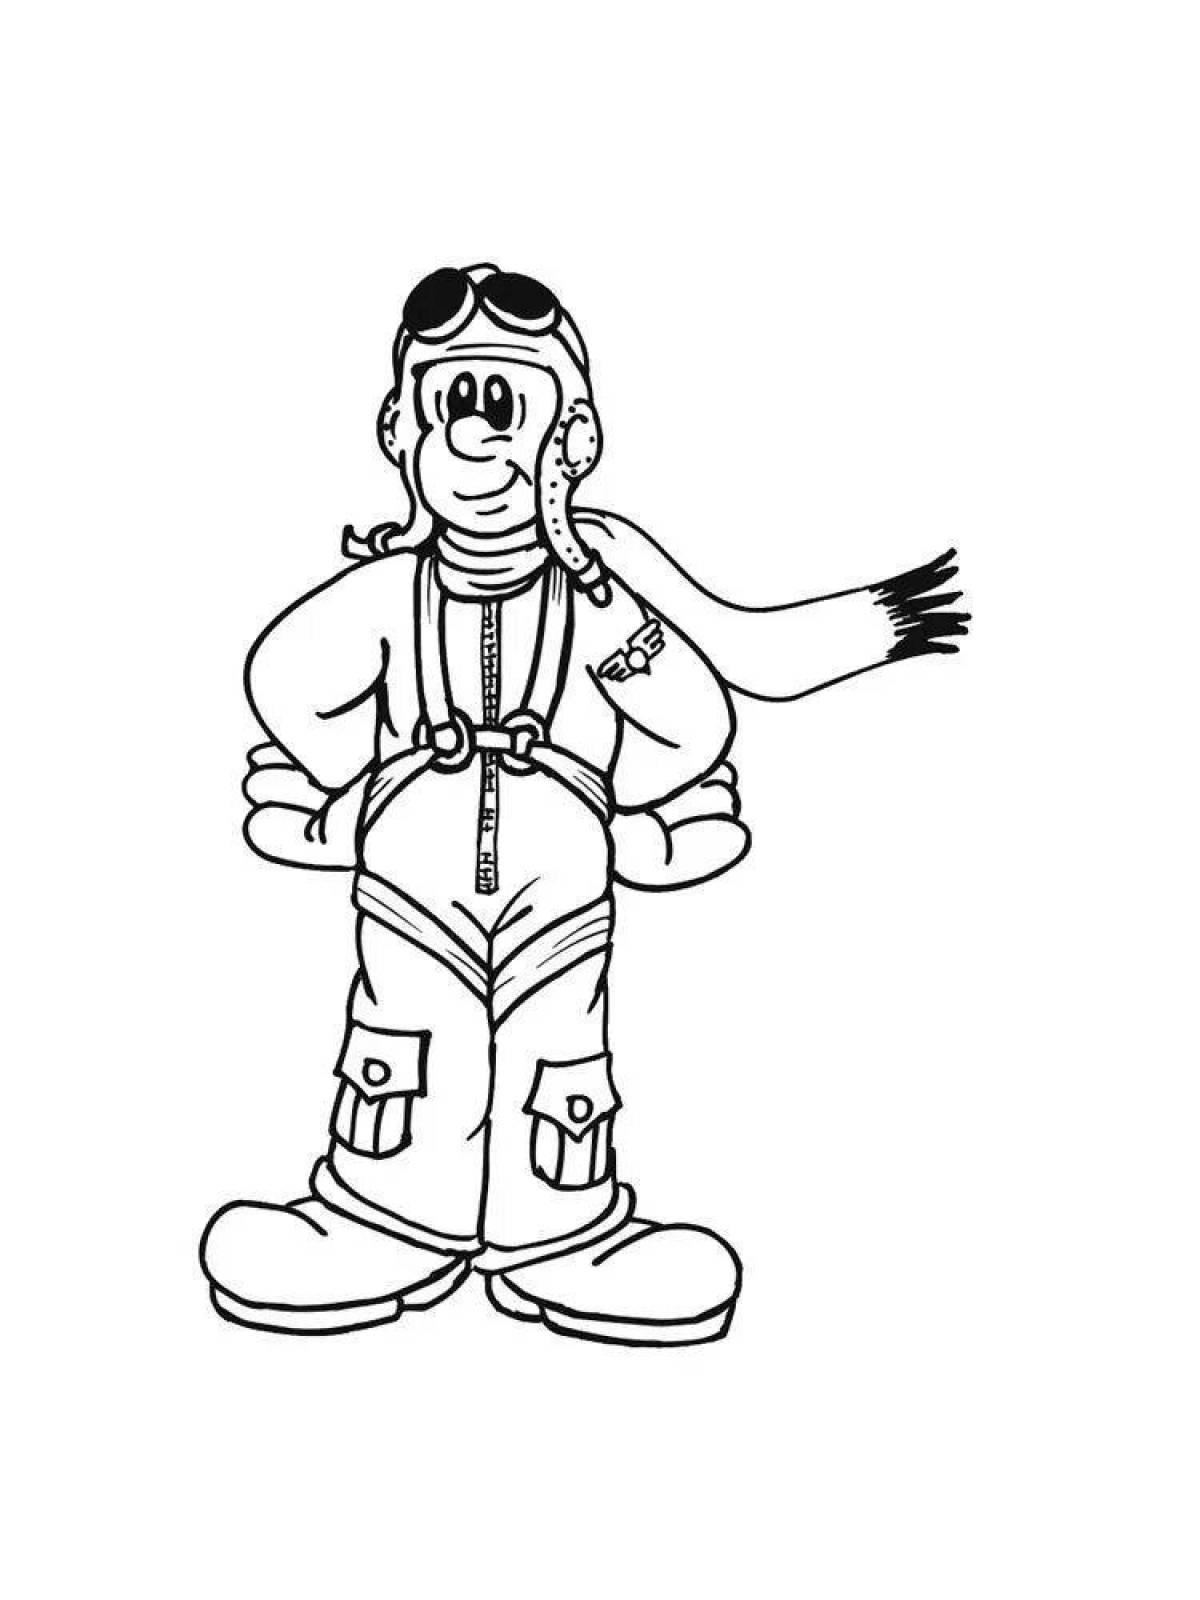 Fun Pilot Coloring Book for Little Ones